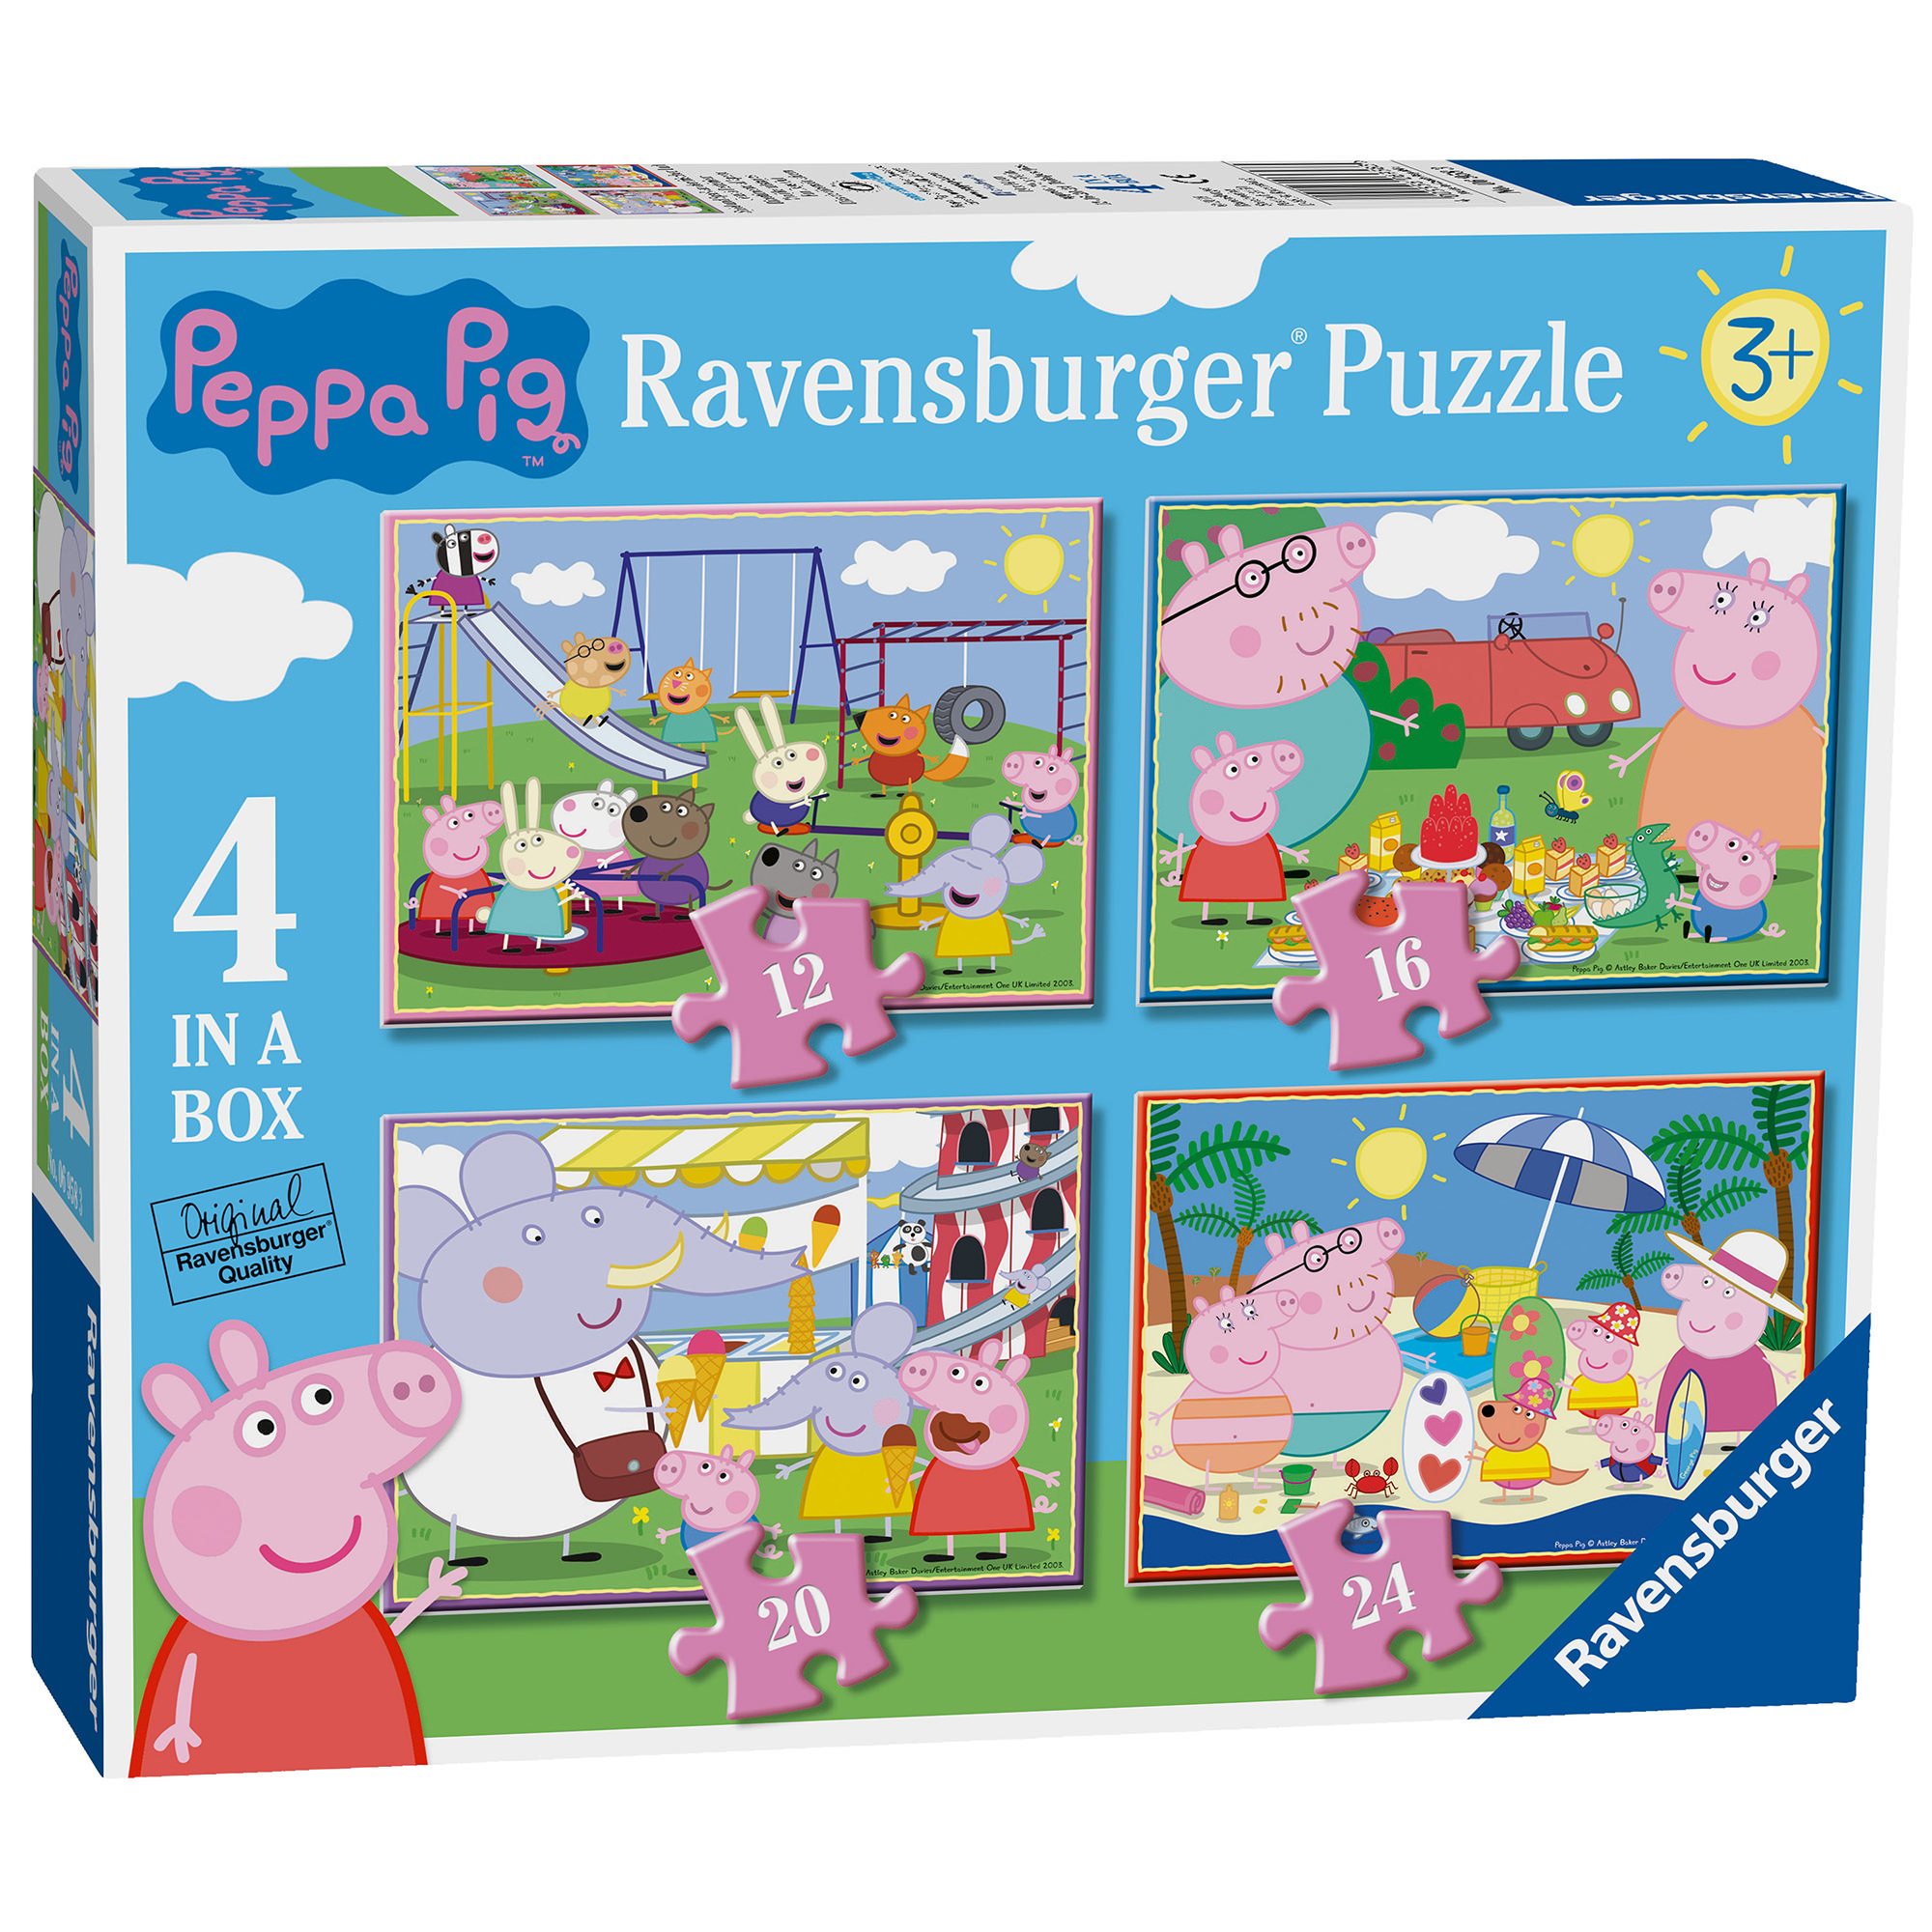 une Boîte Ravensburger Peppa Pig 4 in Jigsaw Puzzles 12, 16, 20, 24pc environ 10.16 cm 